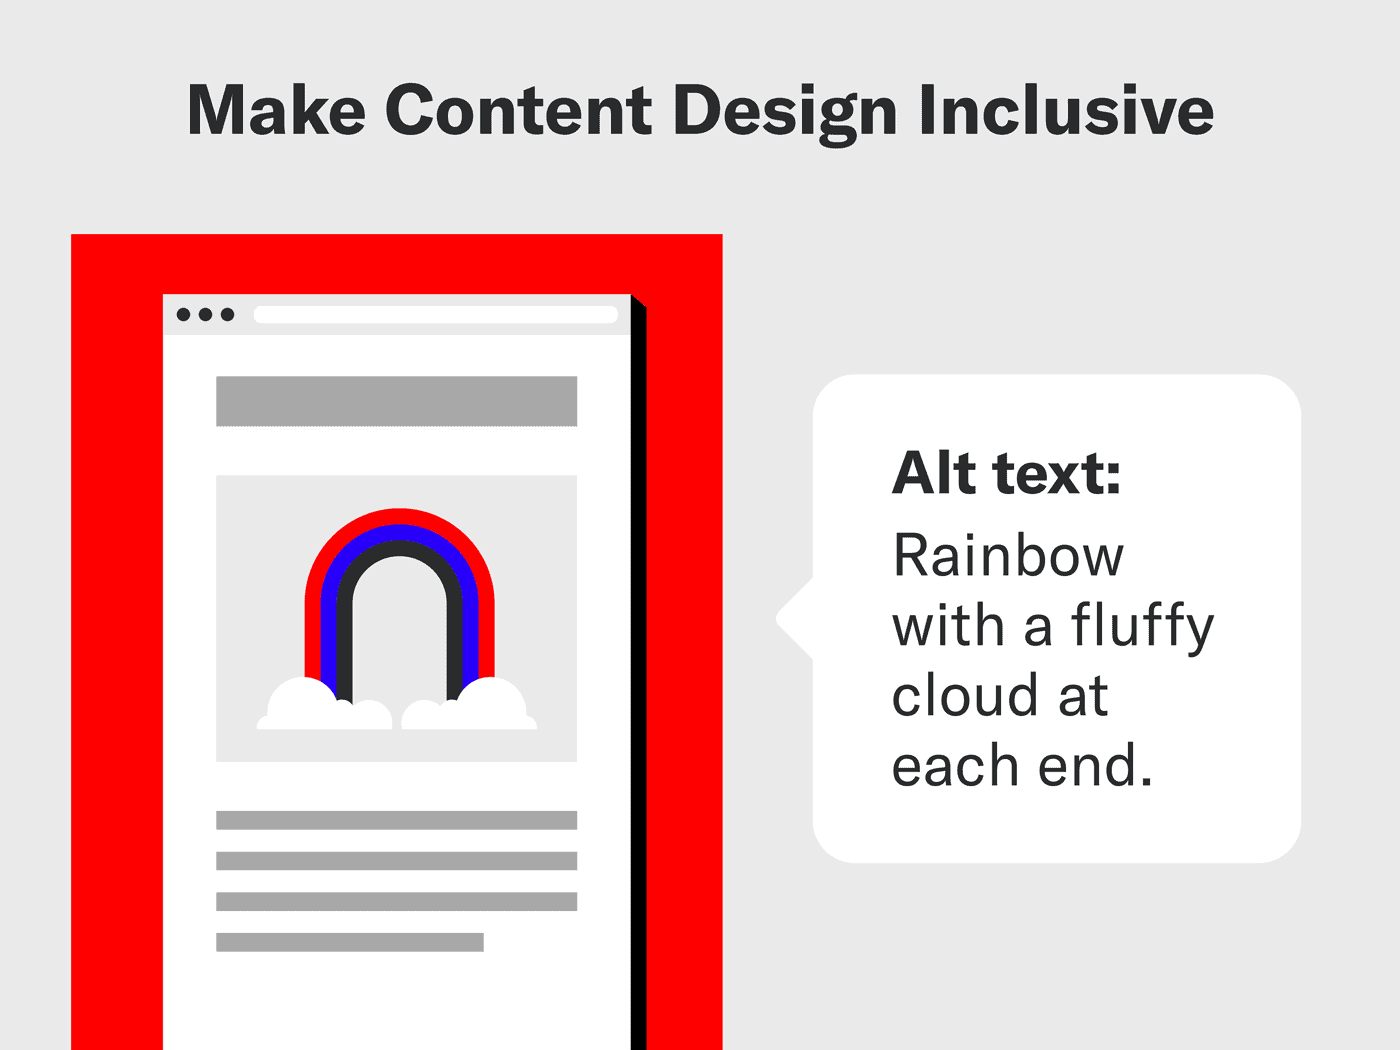 Content design should be inclusive and designed for those with disabilities.